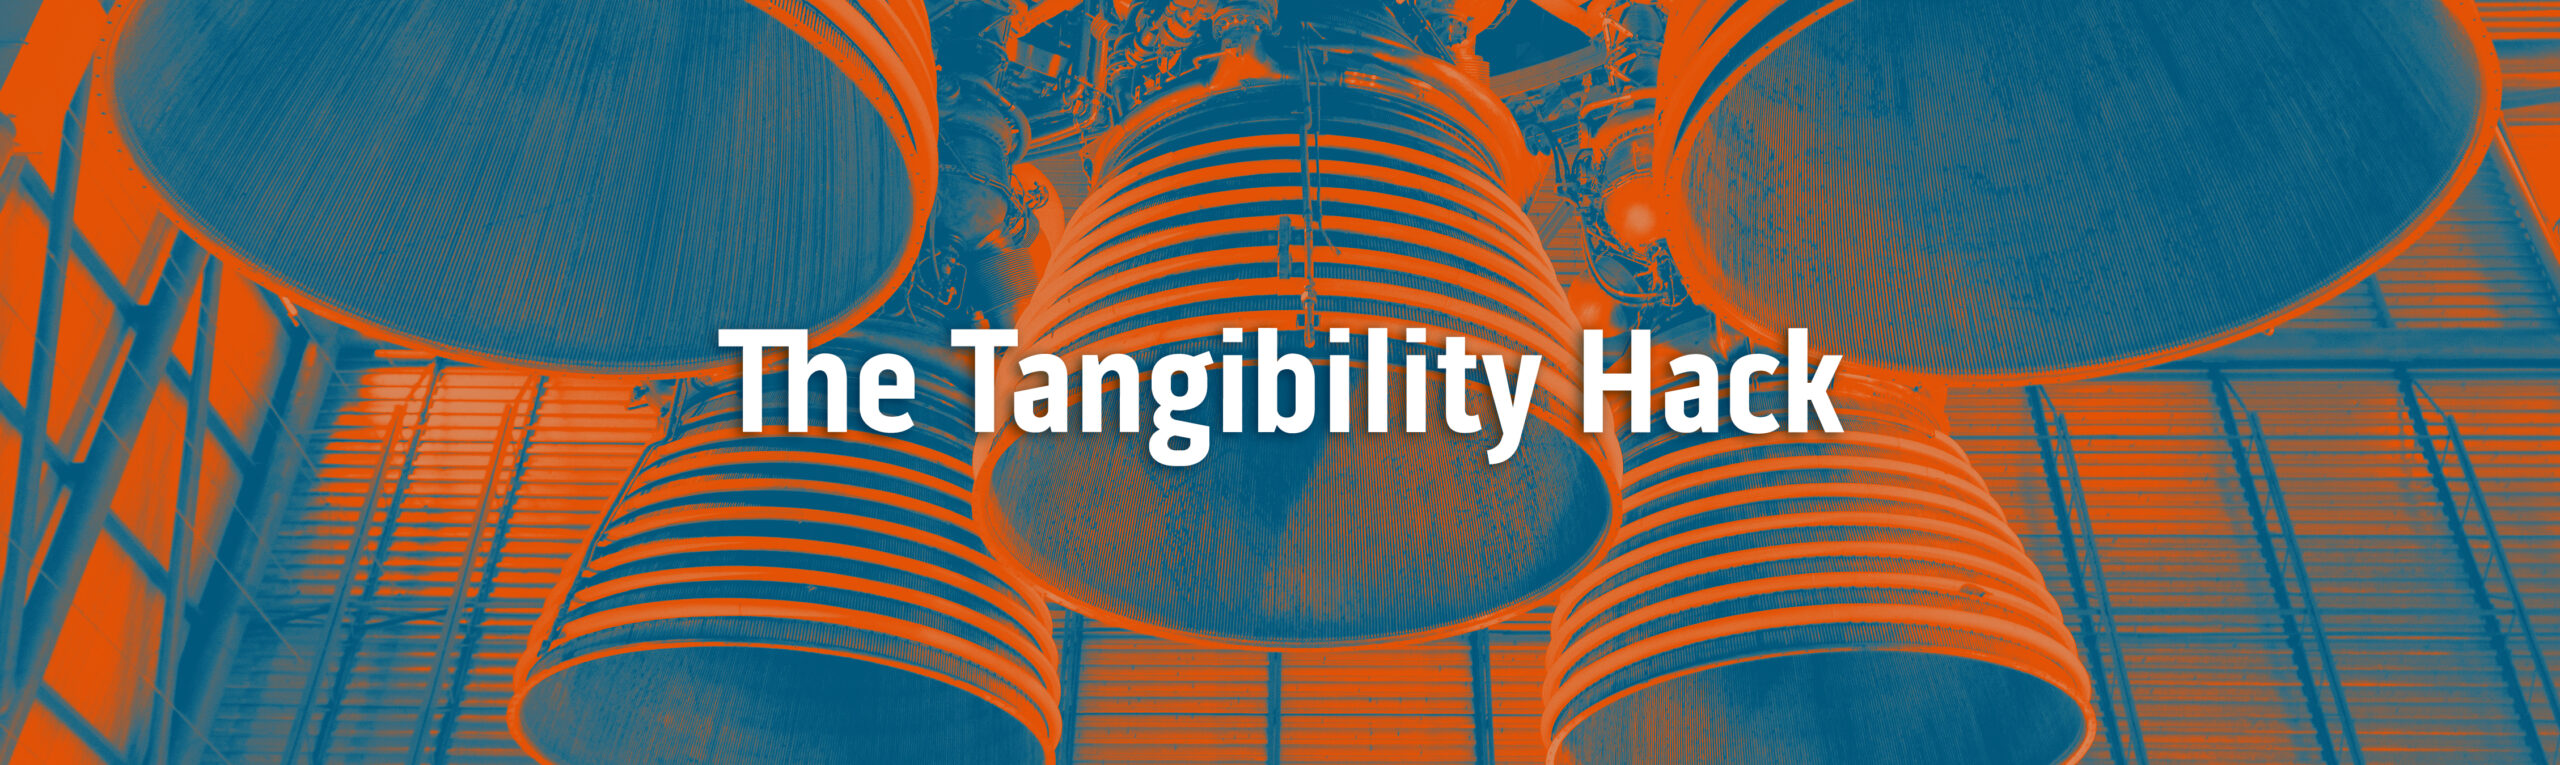 The Tangibility Hack. Background is a closeup of the Saturn V rocket engines treated with an orange and blue filter.